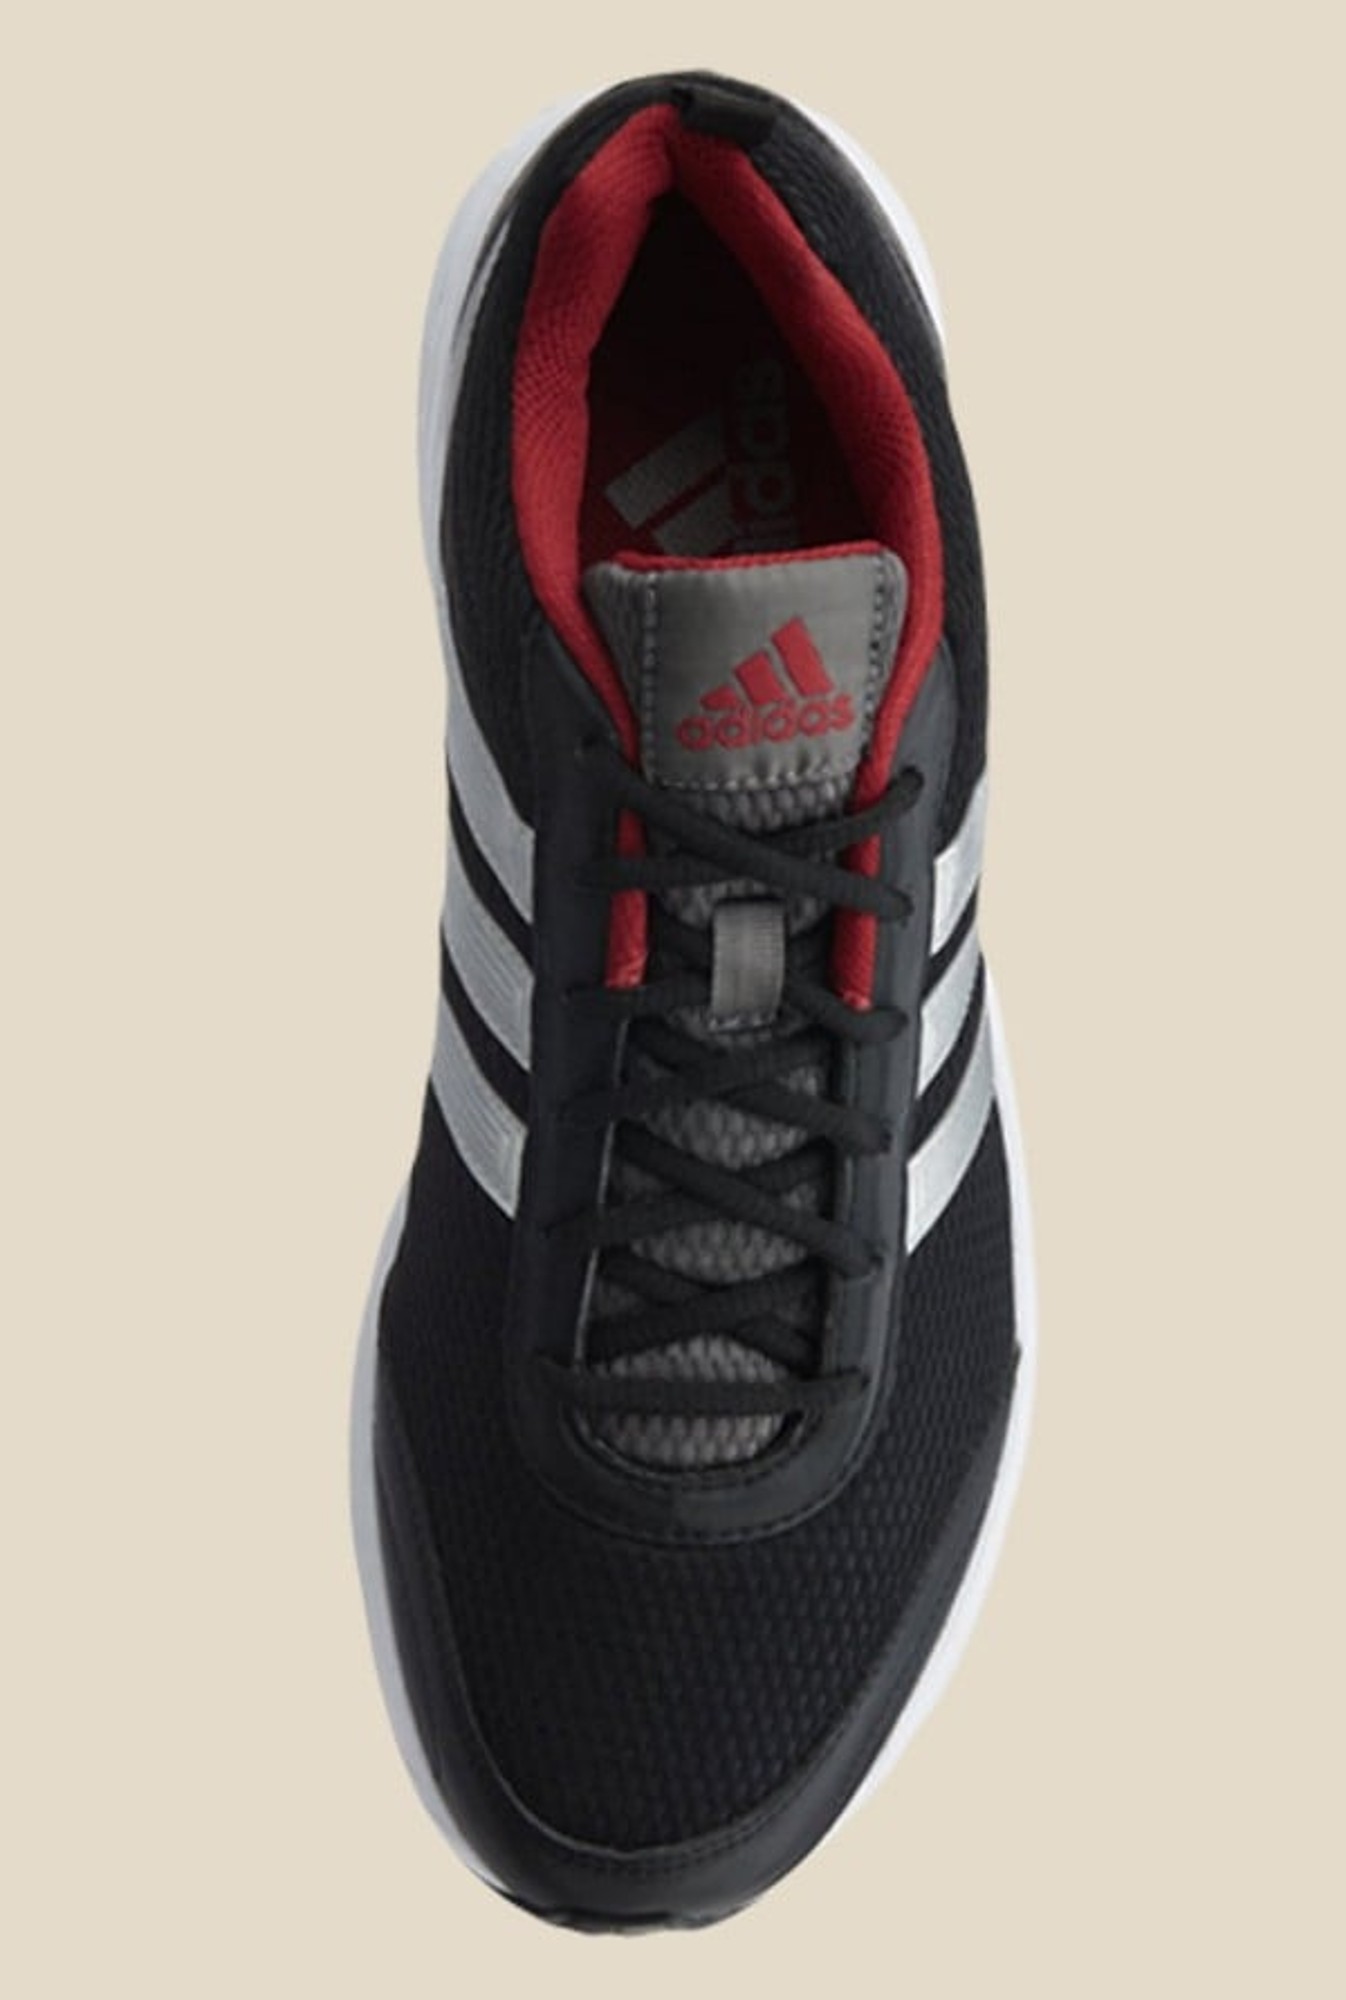 adidas albis shoes